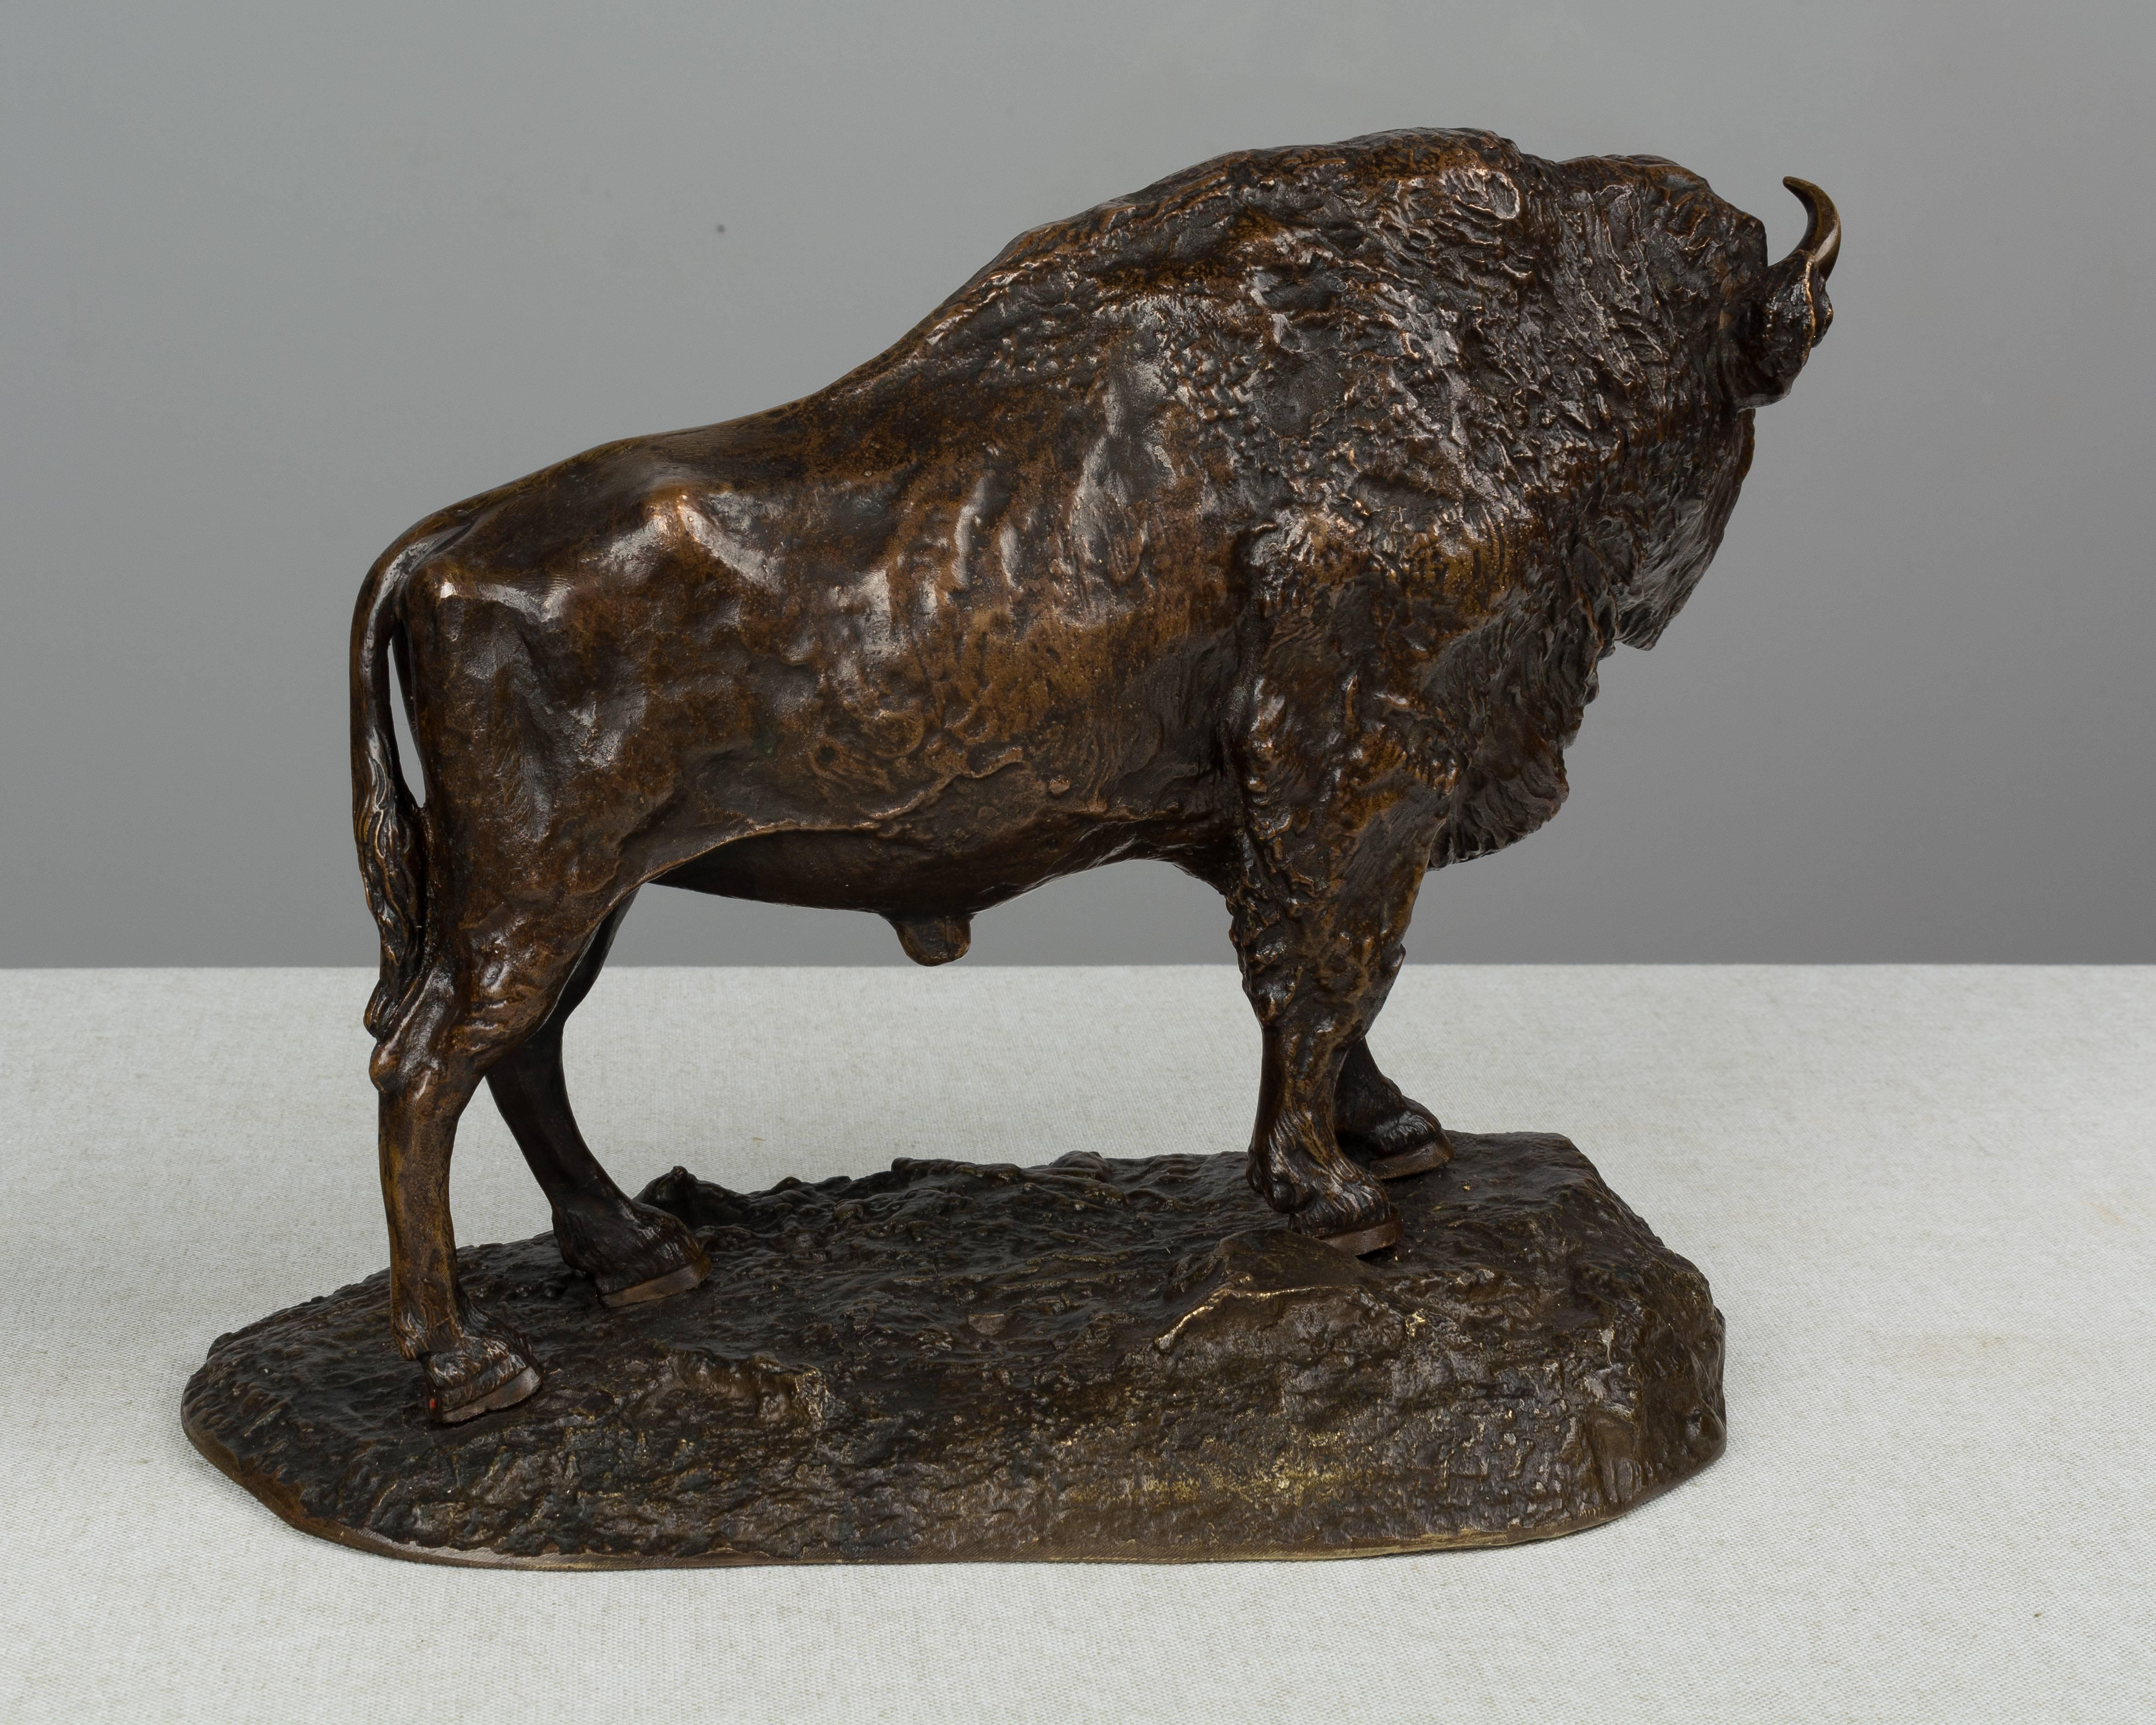 A 19th century French cast bronze bison sculpture. Unsigned. Weight: 20 lbs.